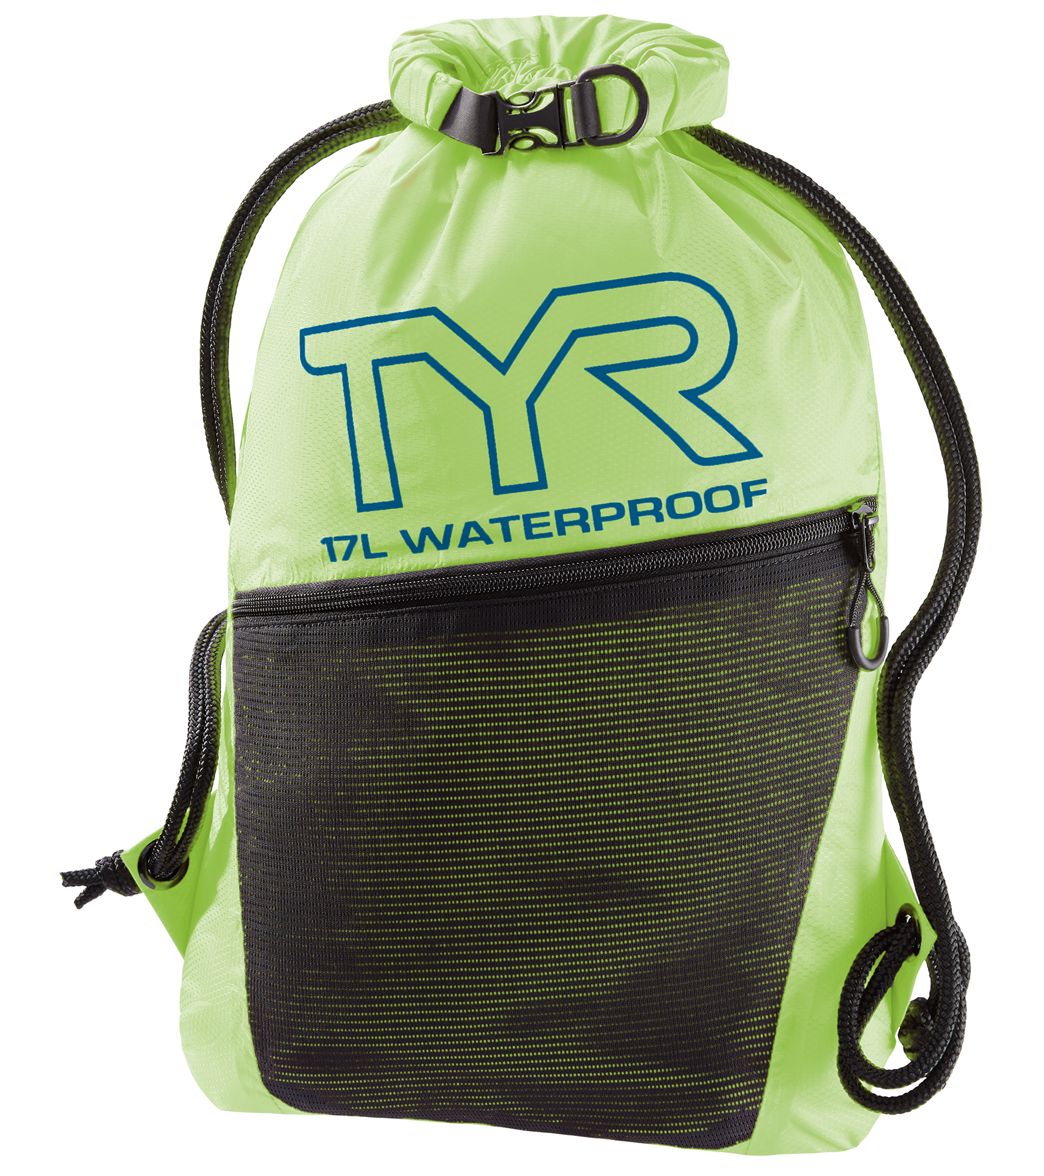 TYR Alliance Waterproof Draw String Sack Pack - Fluorescent Yellow Nylon - Swimoutlet.com